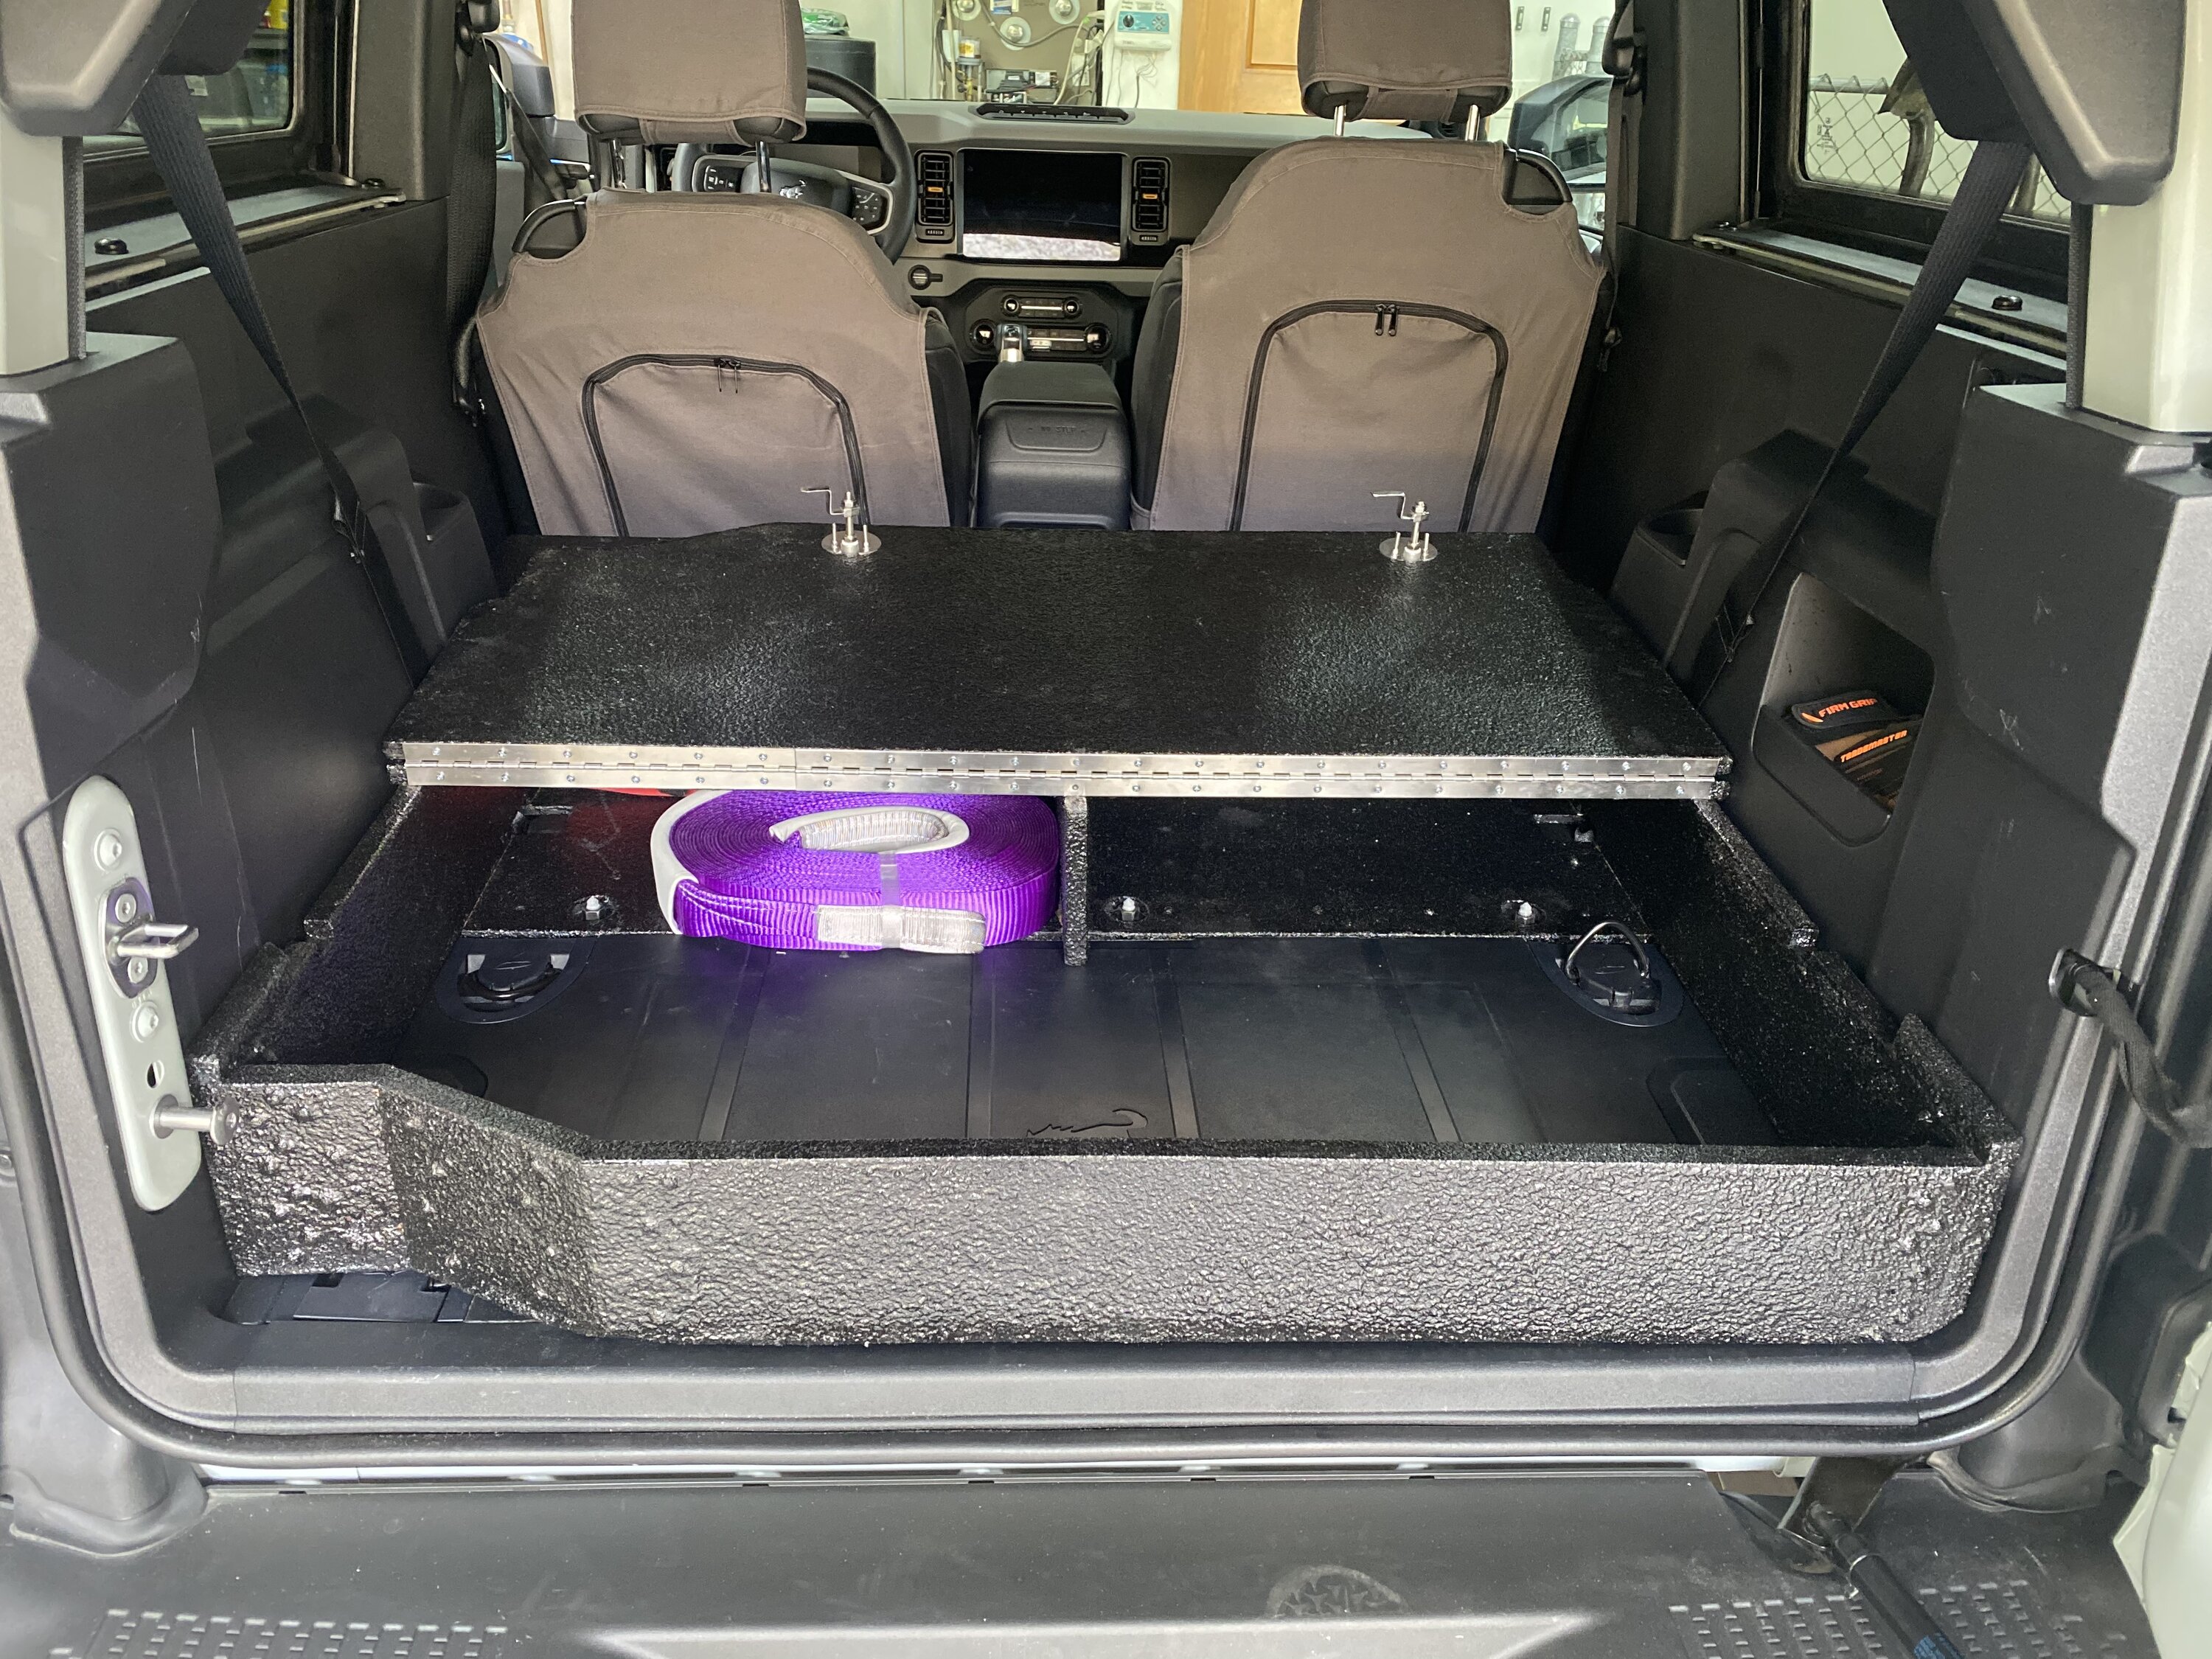 Ford Bronco 2 Door DIY Storage Compartment and Load Floor with Rear Seats Removed EE943FAD-0AD9-4CD4-9DFE-B2A0A70A8737